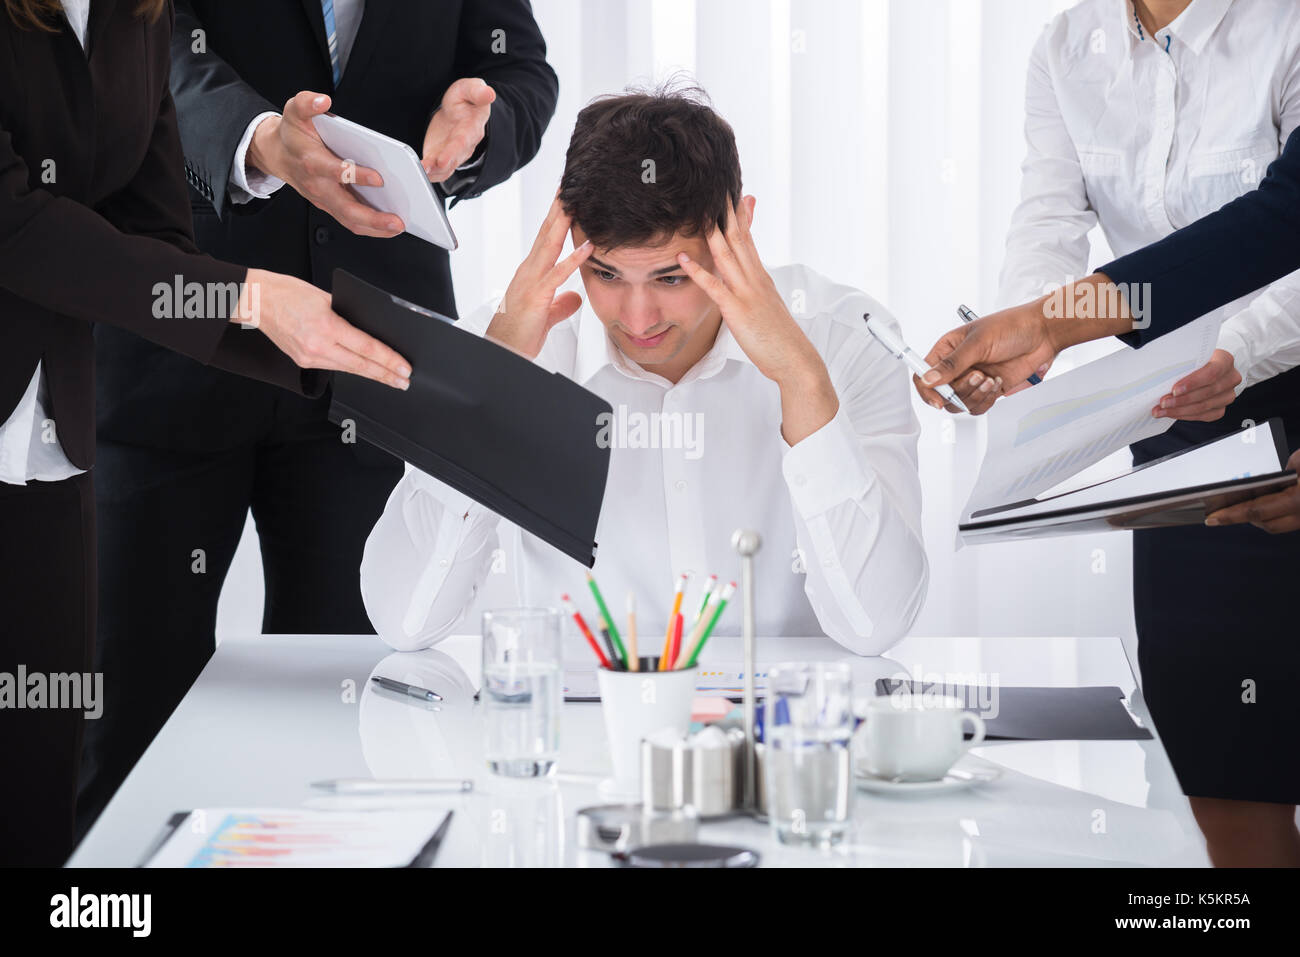 Young Businessman Stressed Out At Work Surrounded By Businesspeople Stock Photo